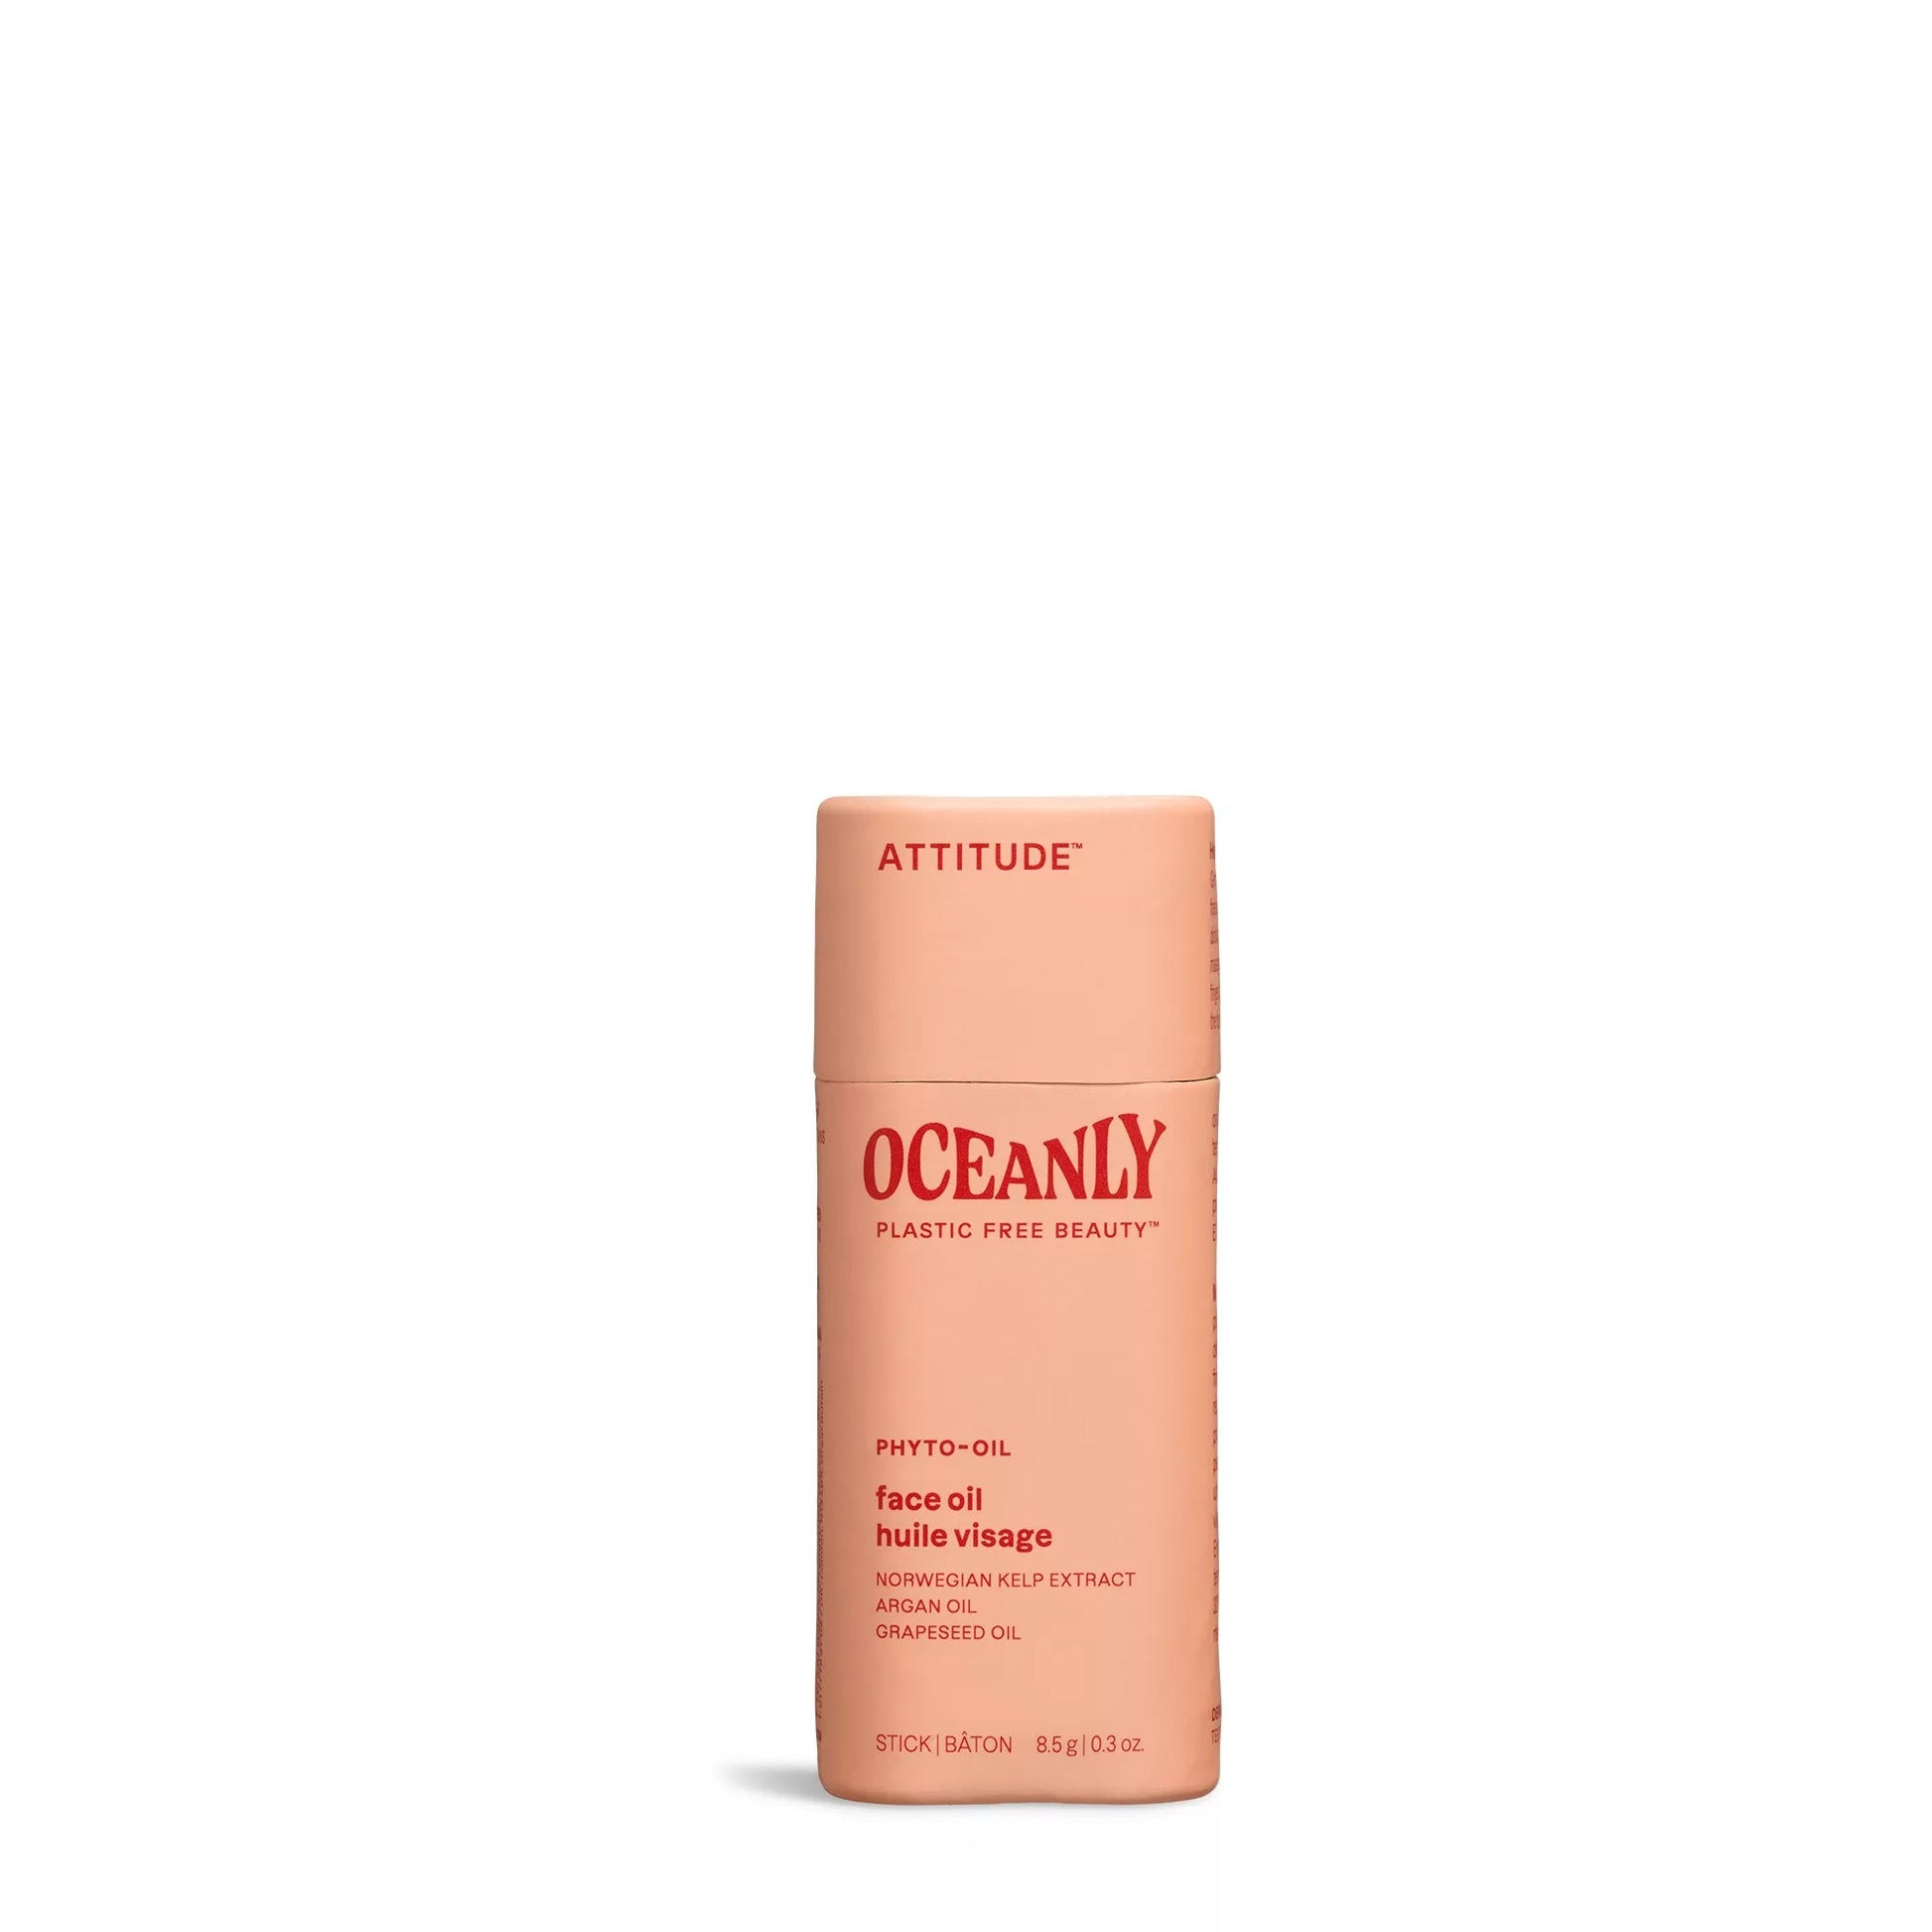 ATTITUDE Oceanly Phyto-Oil Mini Face Oil Unscented 8.5g 16086_en? 8.5g Unscented